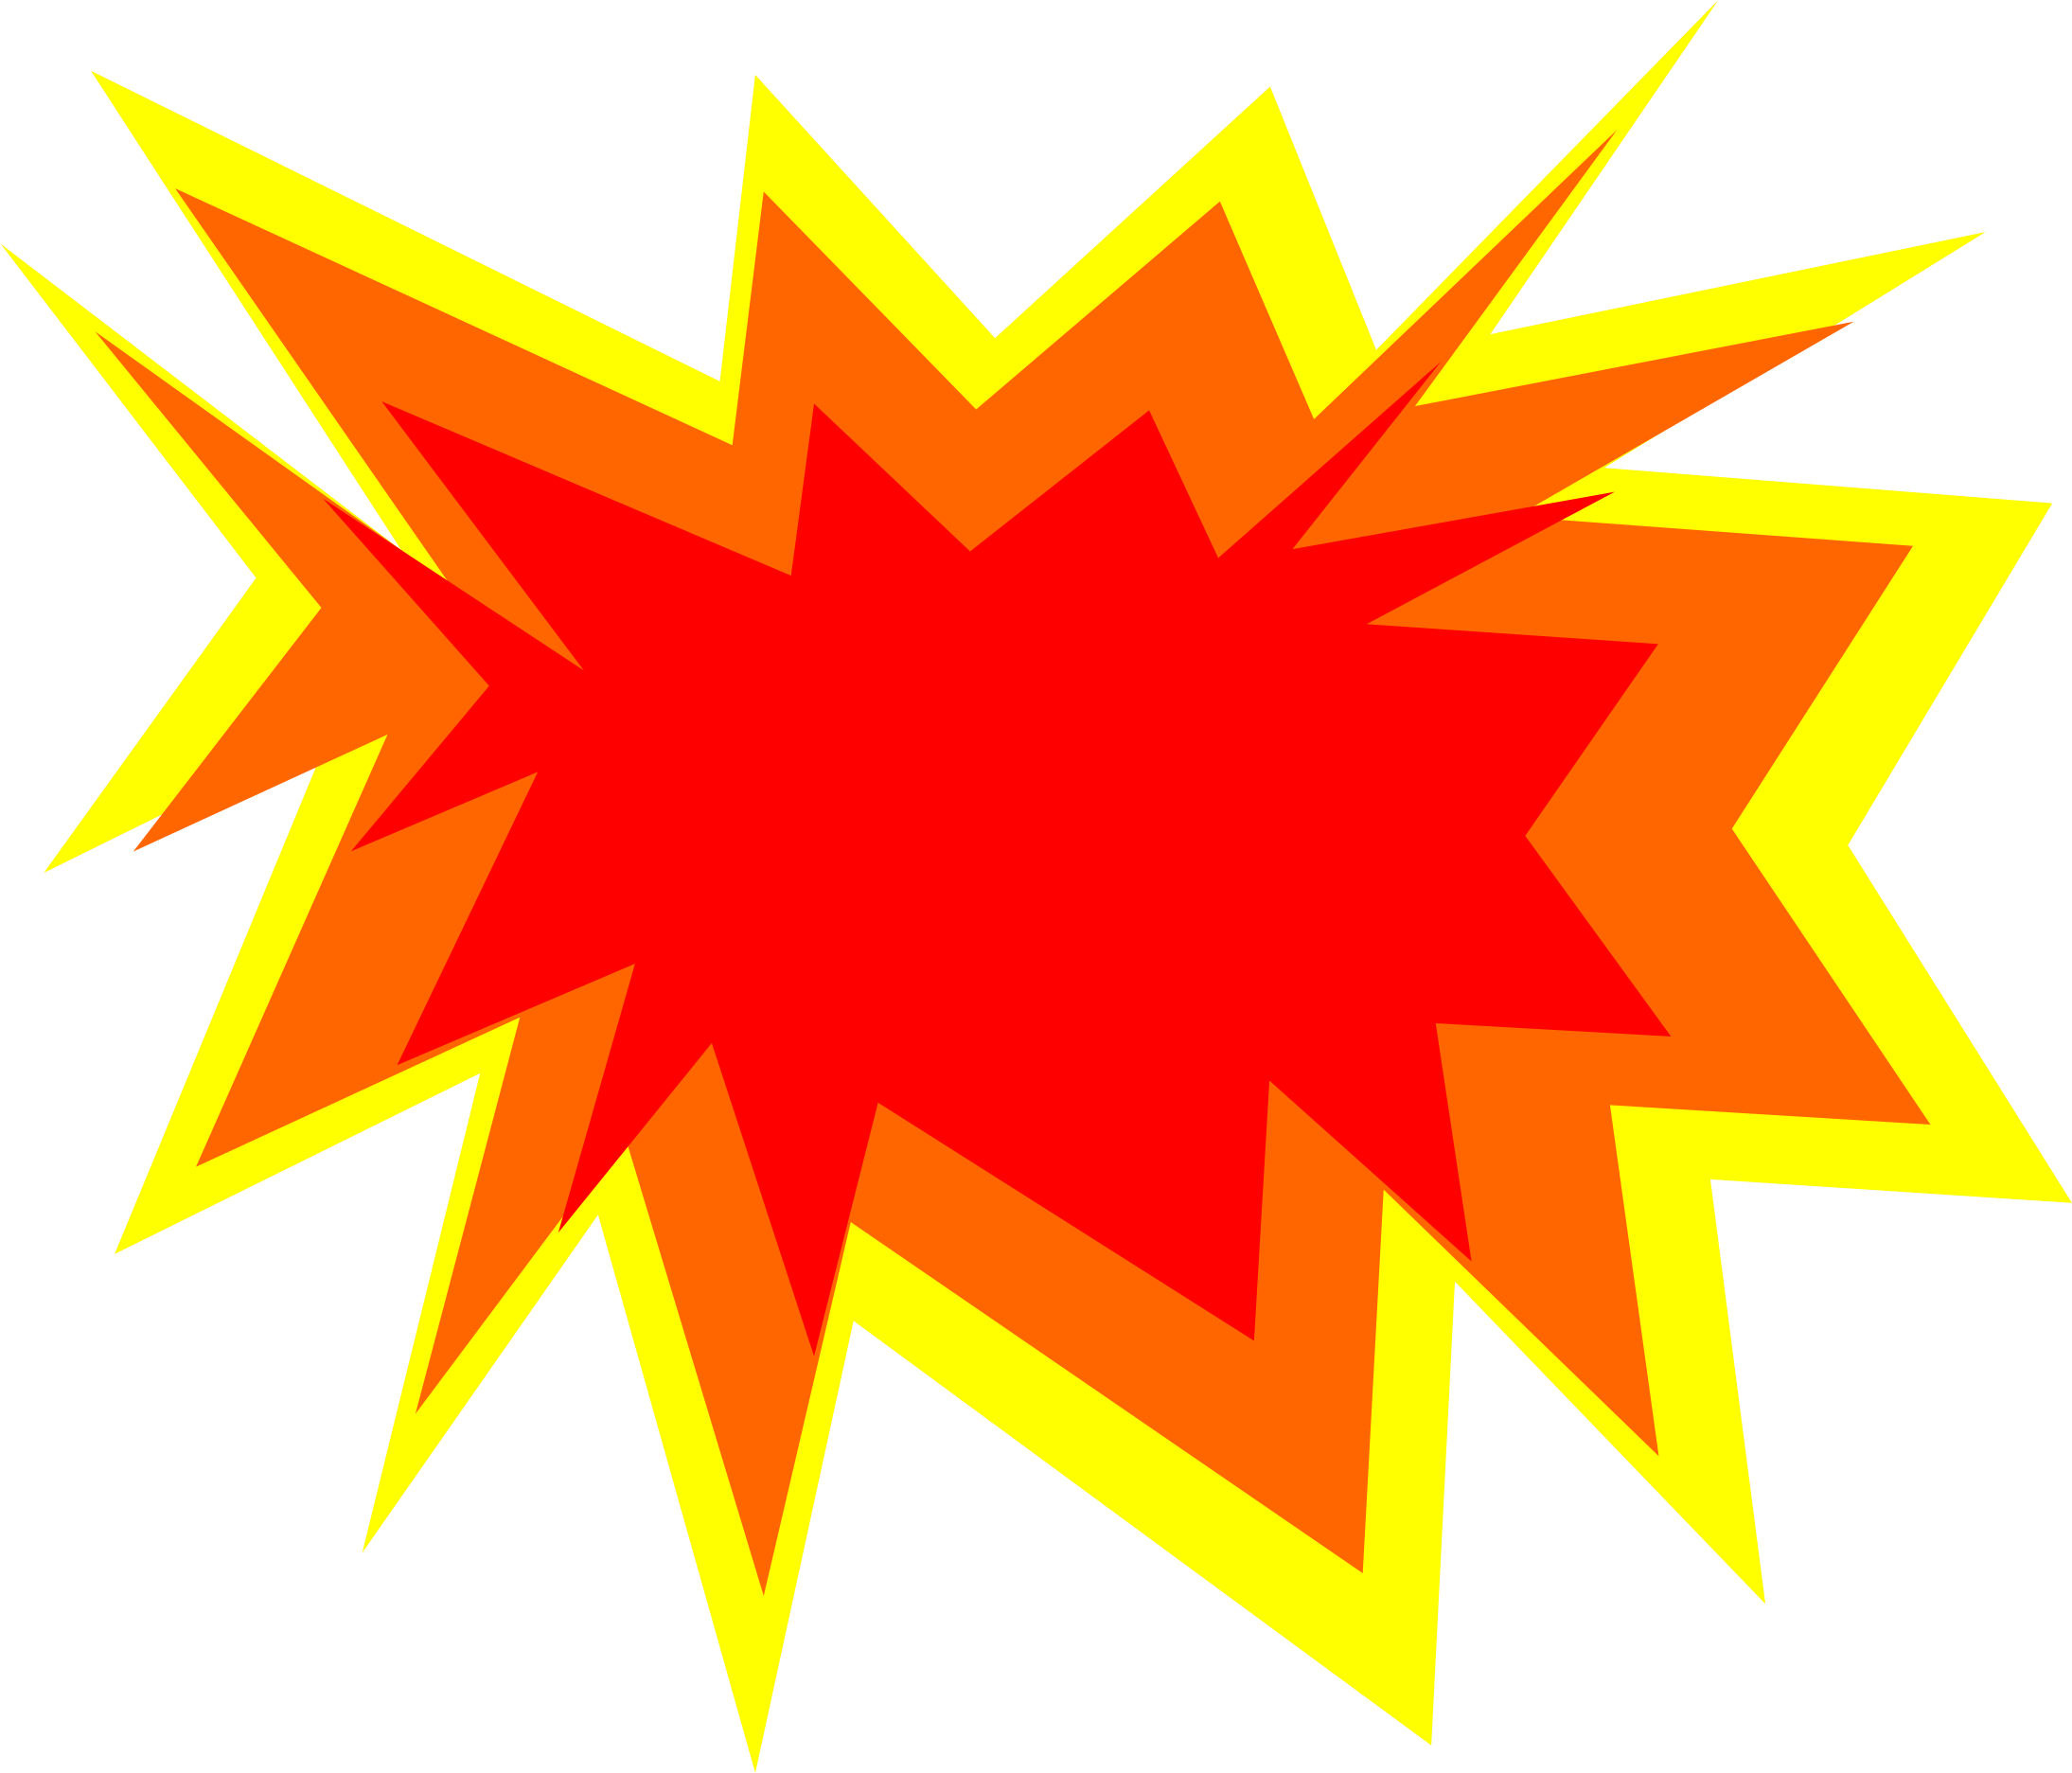 Explosion effect clipart clipart images gallery for free